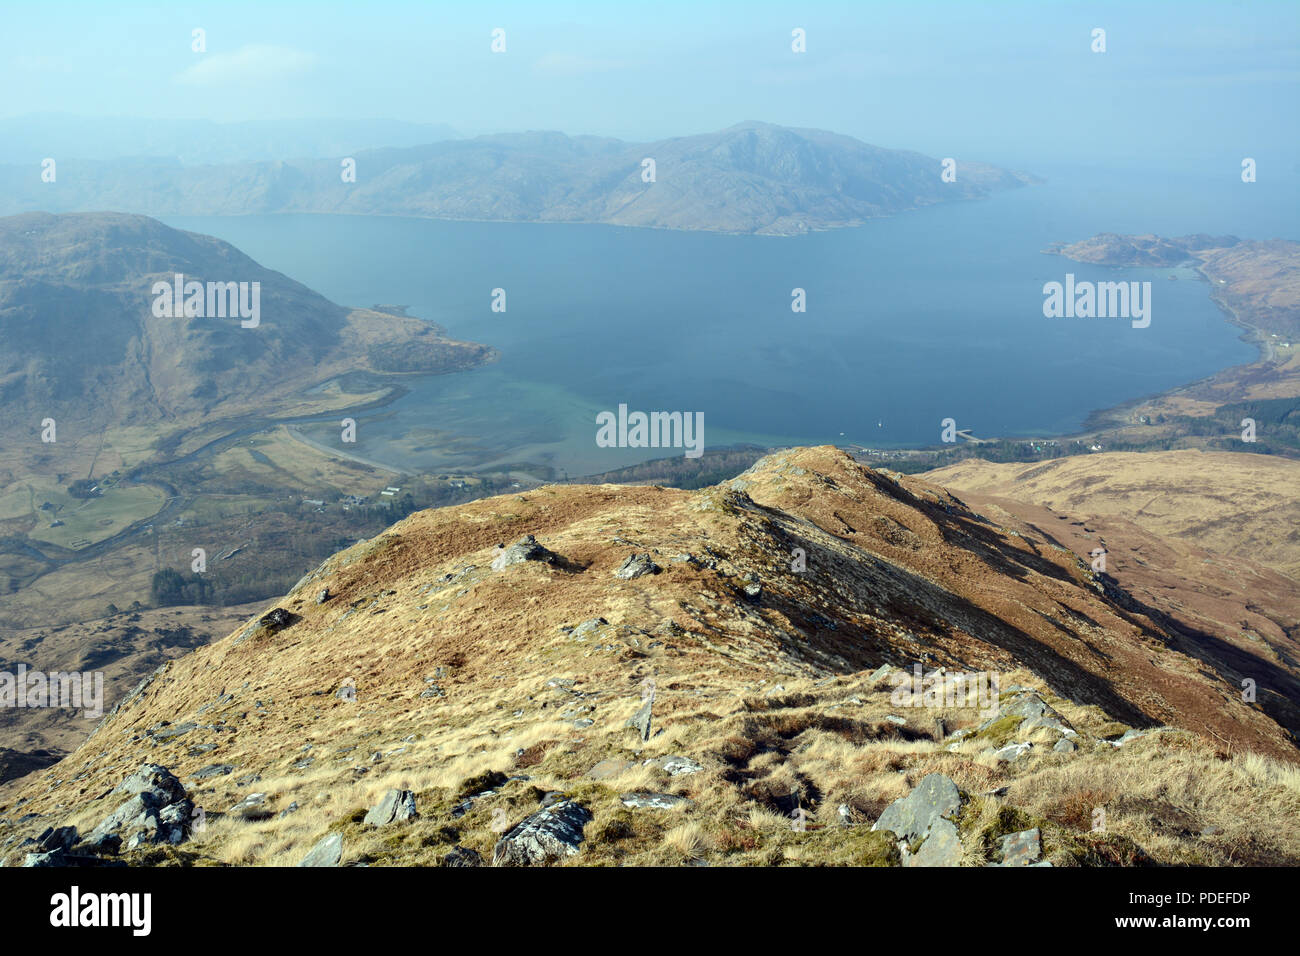 A mountain lookout on Sgurr Coire Choinnichean above the Atlantic ocean and the town of Inverie, Knoydart Peninsula, Scottish Highlands, Scotland, UK. Stock Photo